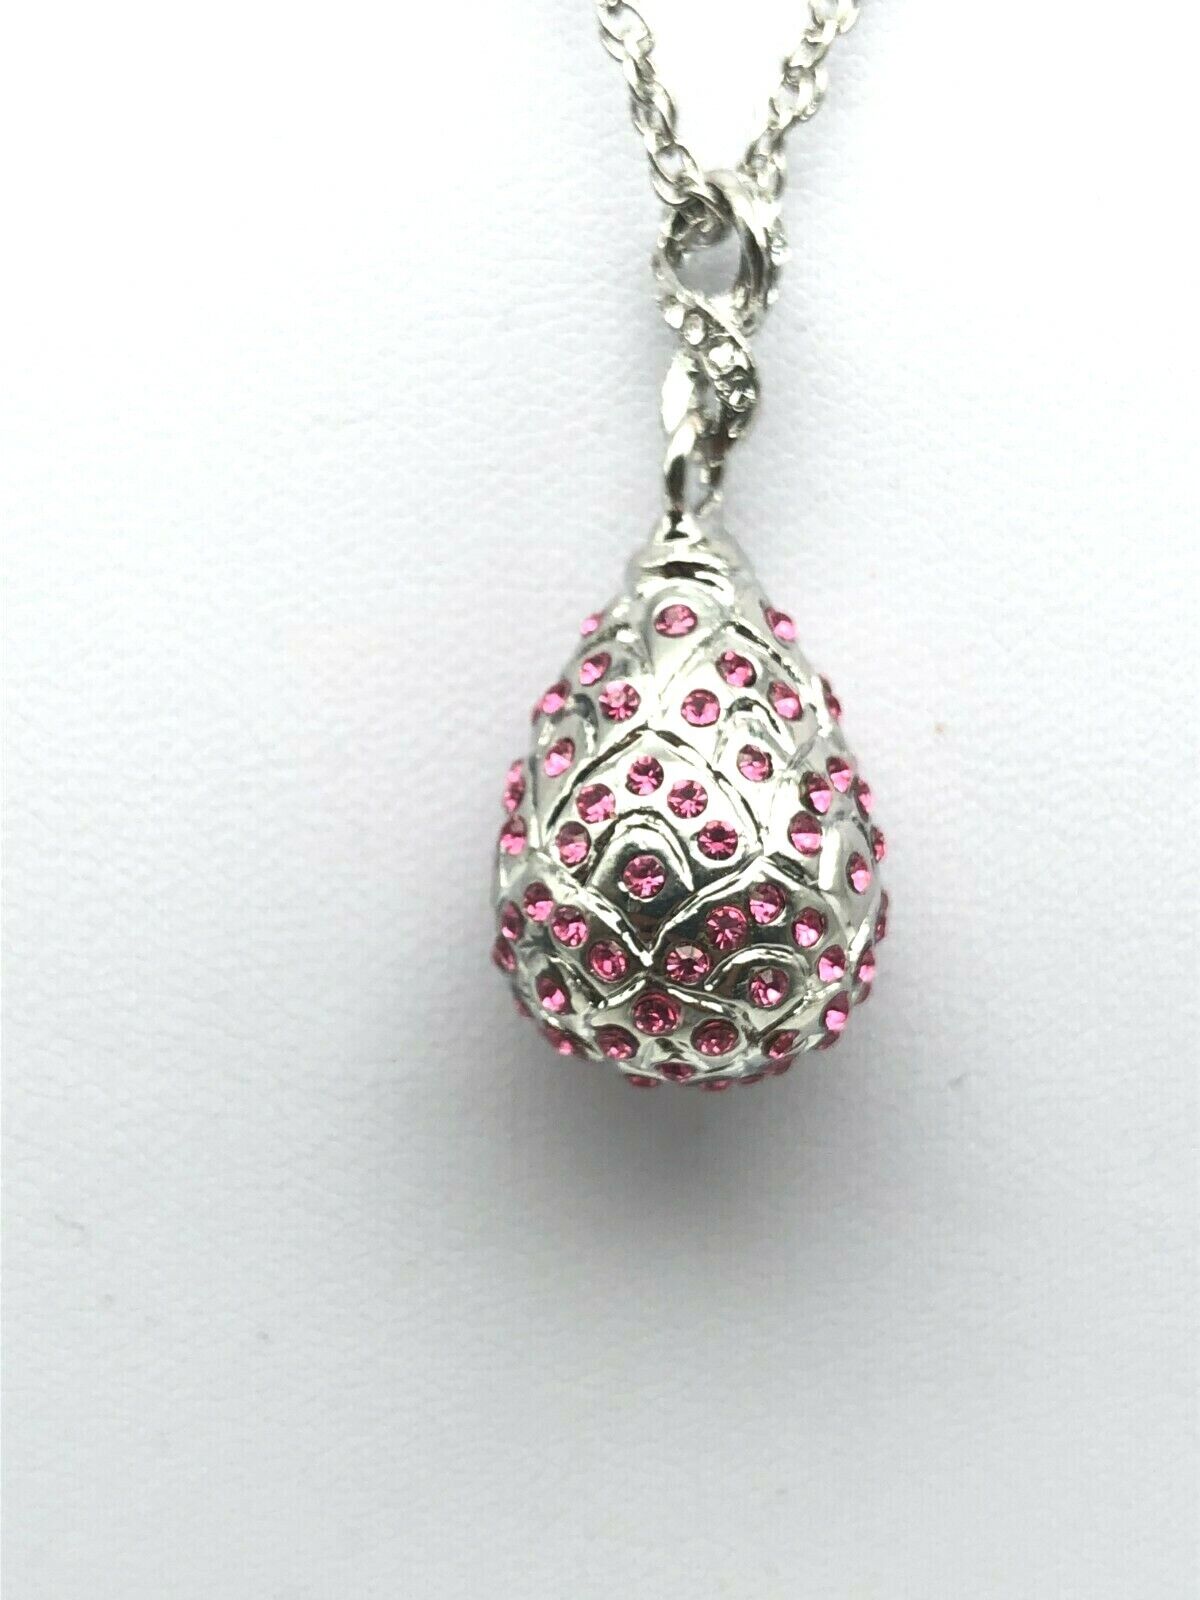 Silver and red Egg Pendant Necklace with crystals by Keren Kopal